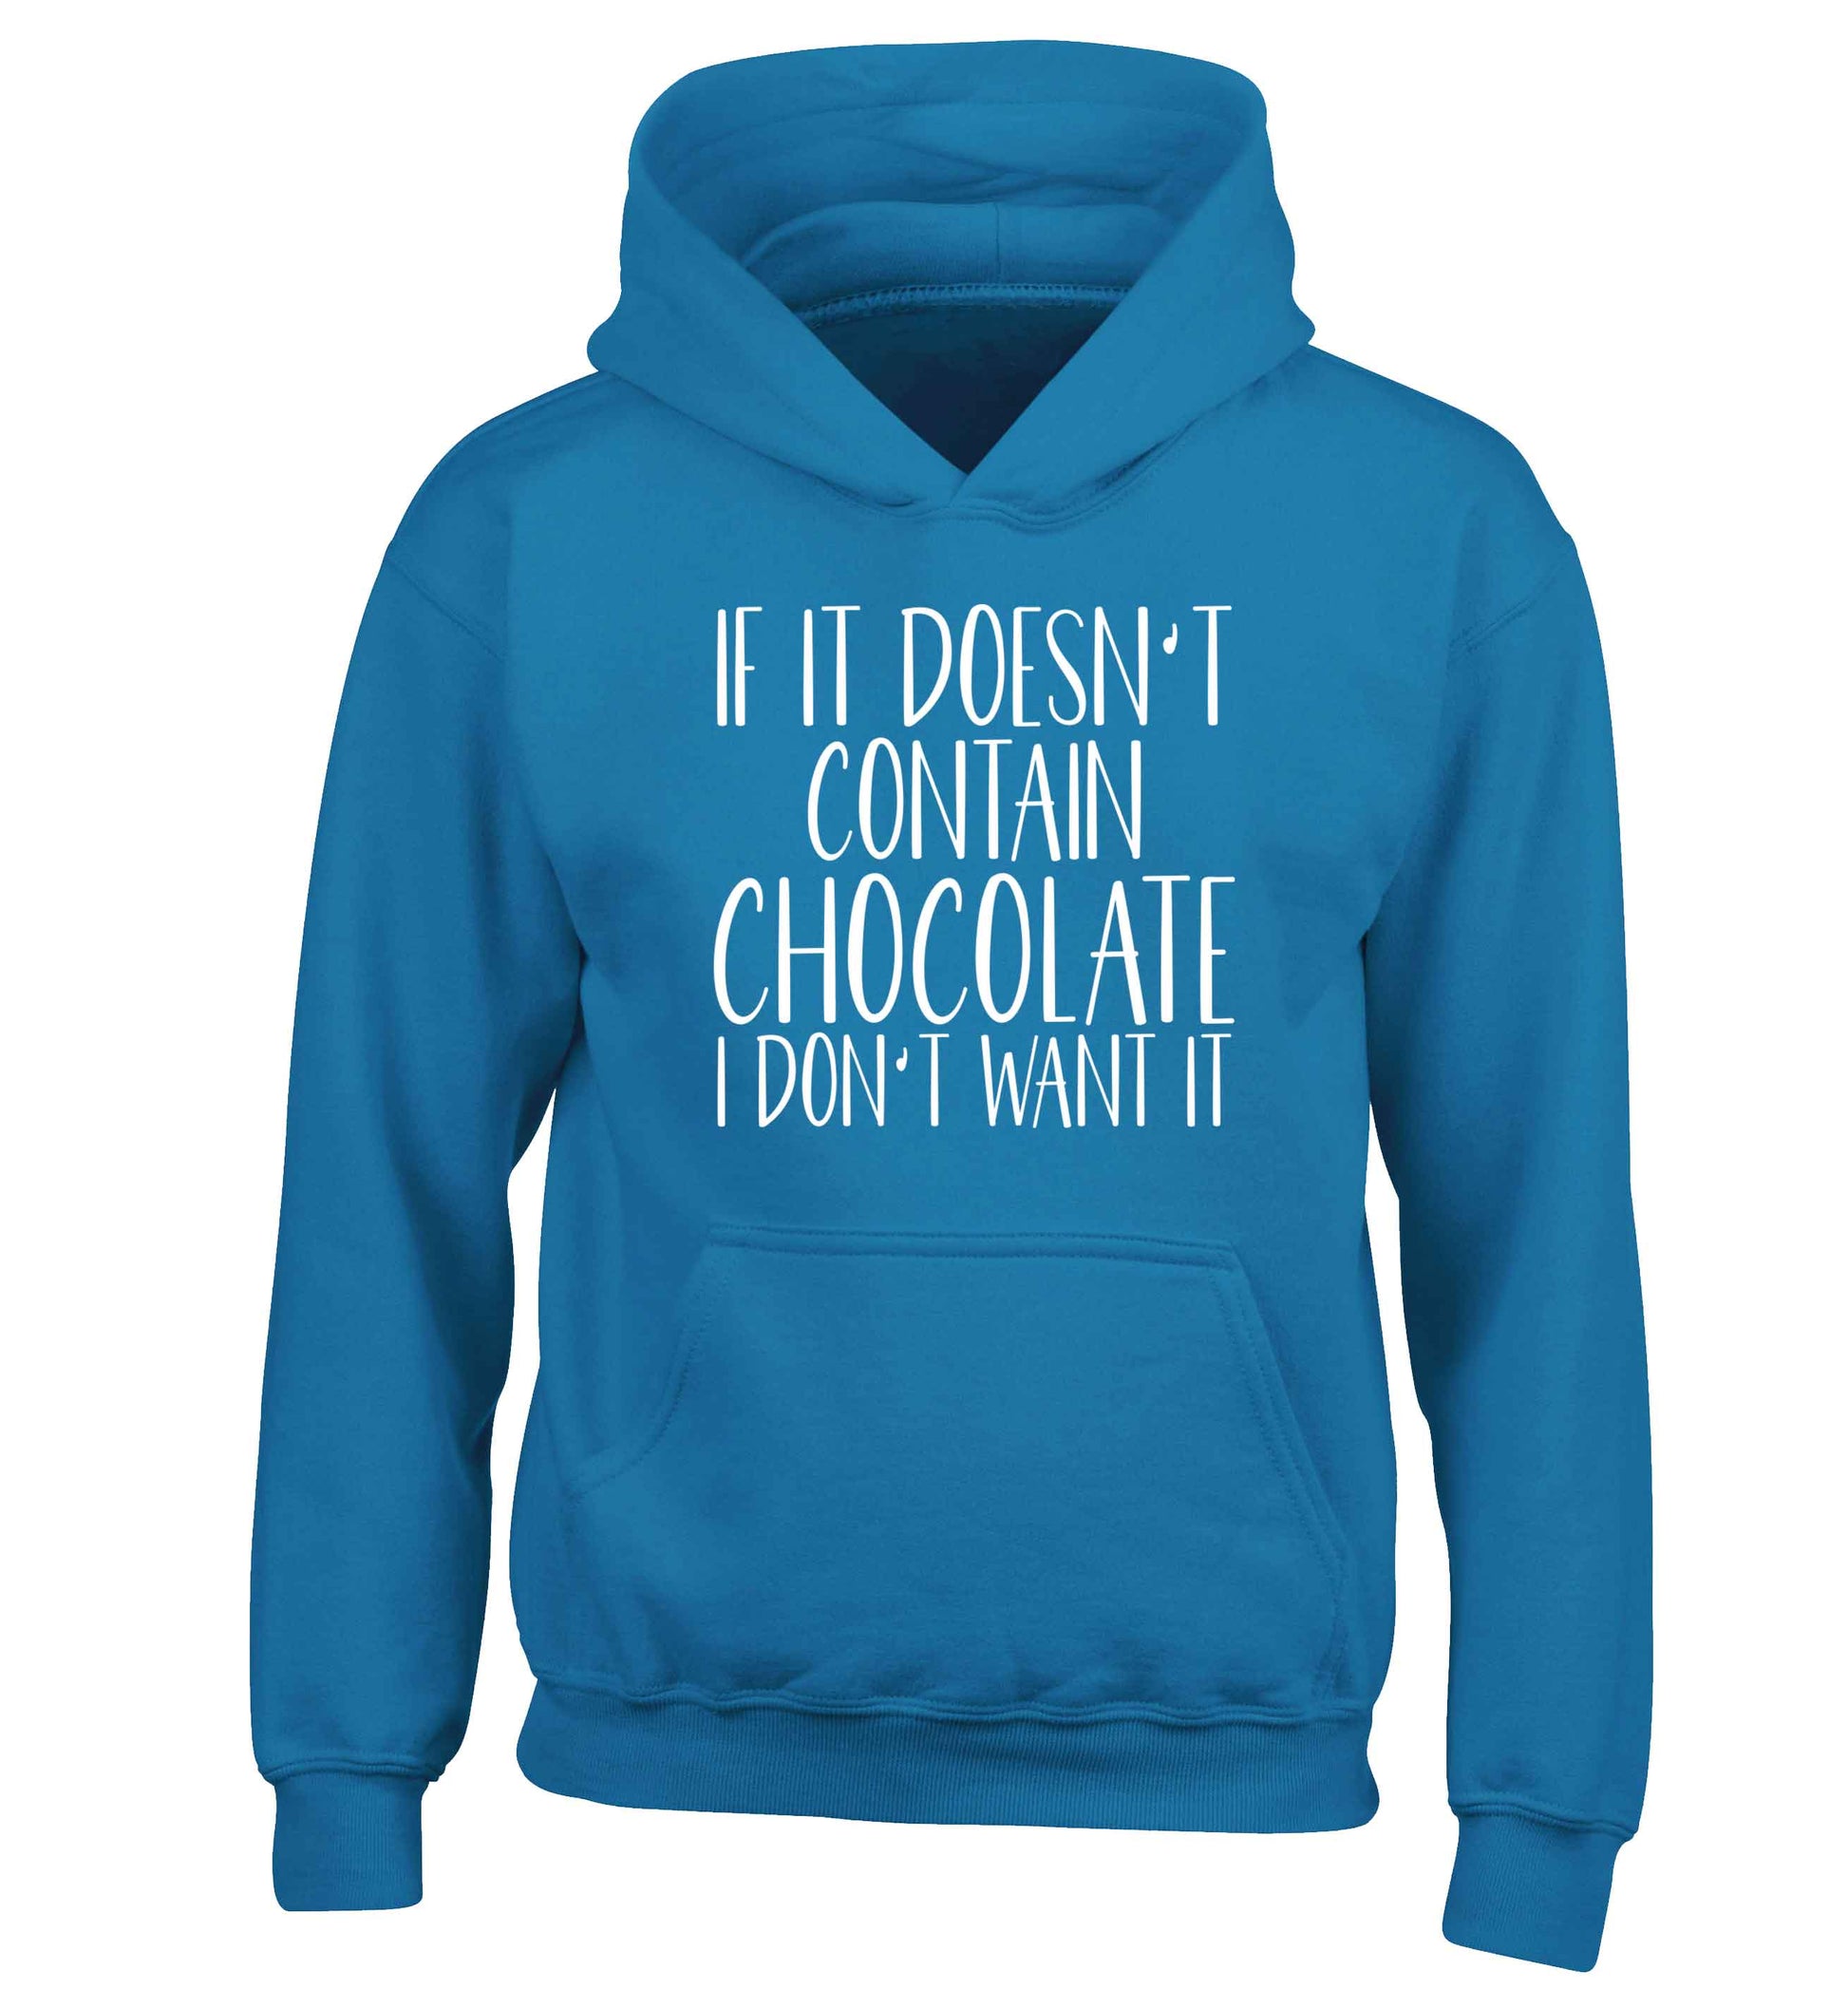 If it doesn't contain chocolate I don't want it children's blue hoodie 12-13 Years